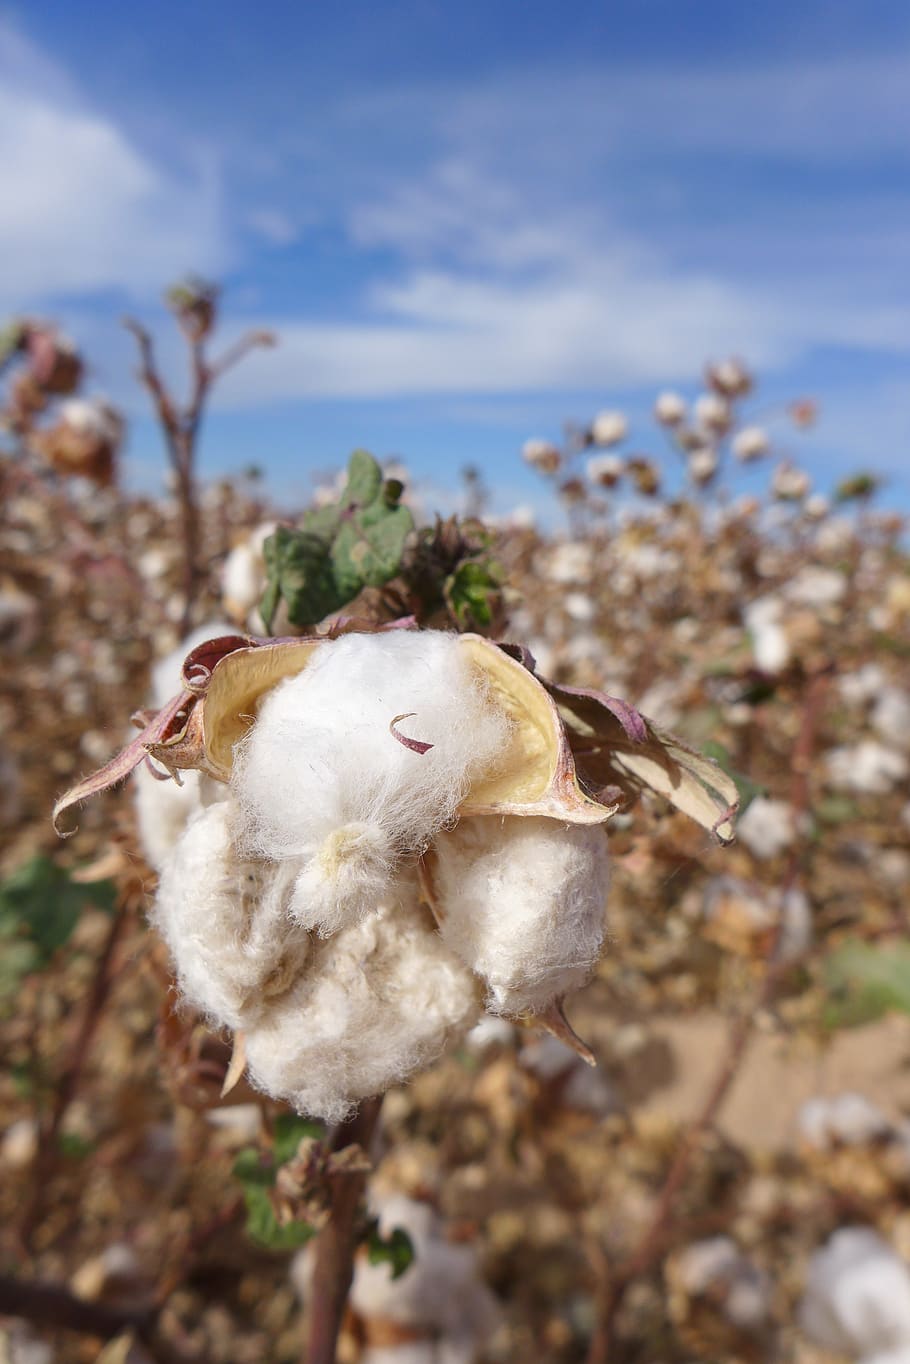 cotton, cotton flower, cotton field, blue sky, public record, focus on foreground, plant, close-up, day, nature